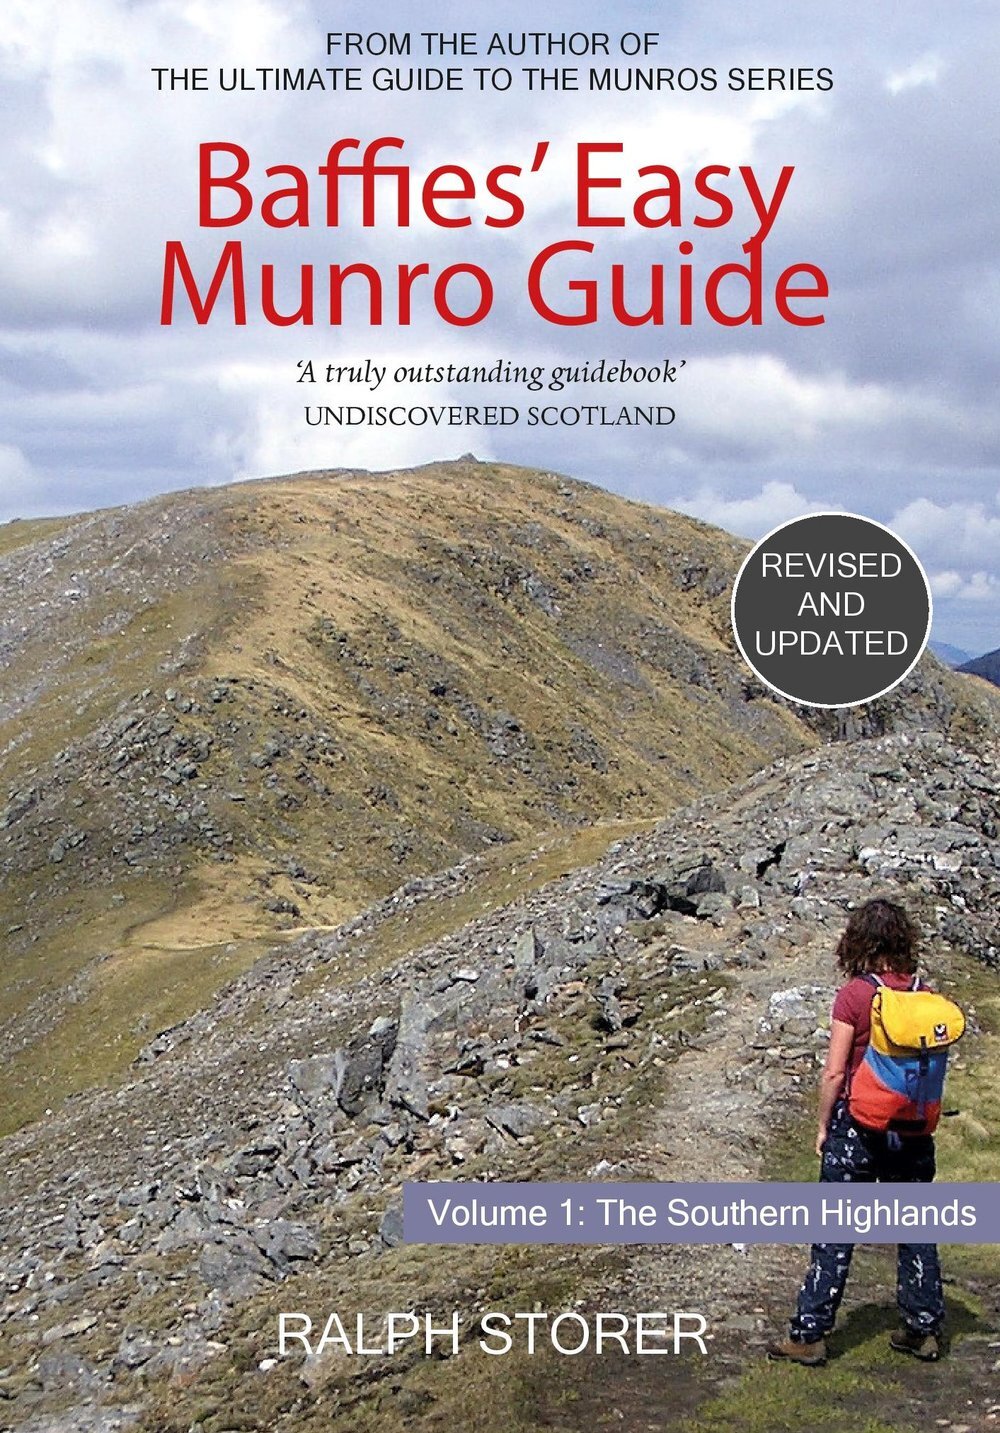 Baffies' Easy Guide to the Munro Volume 1 The Souther Highlands Luath Press.jpg